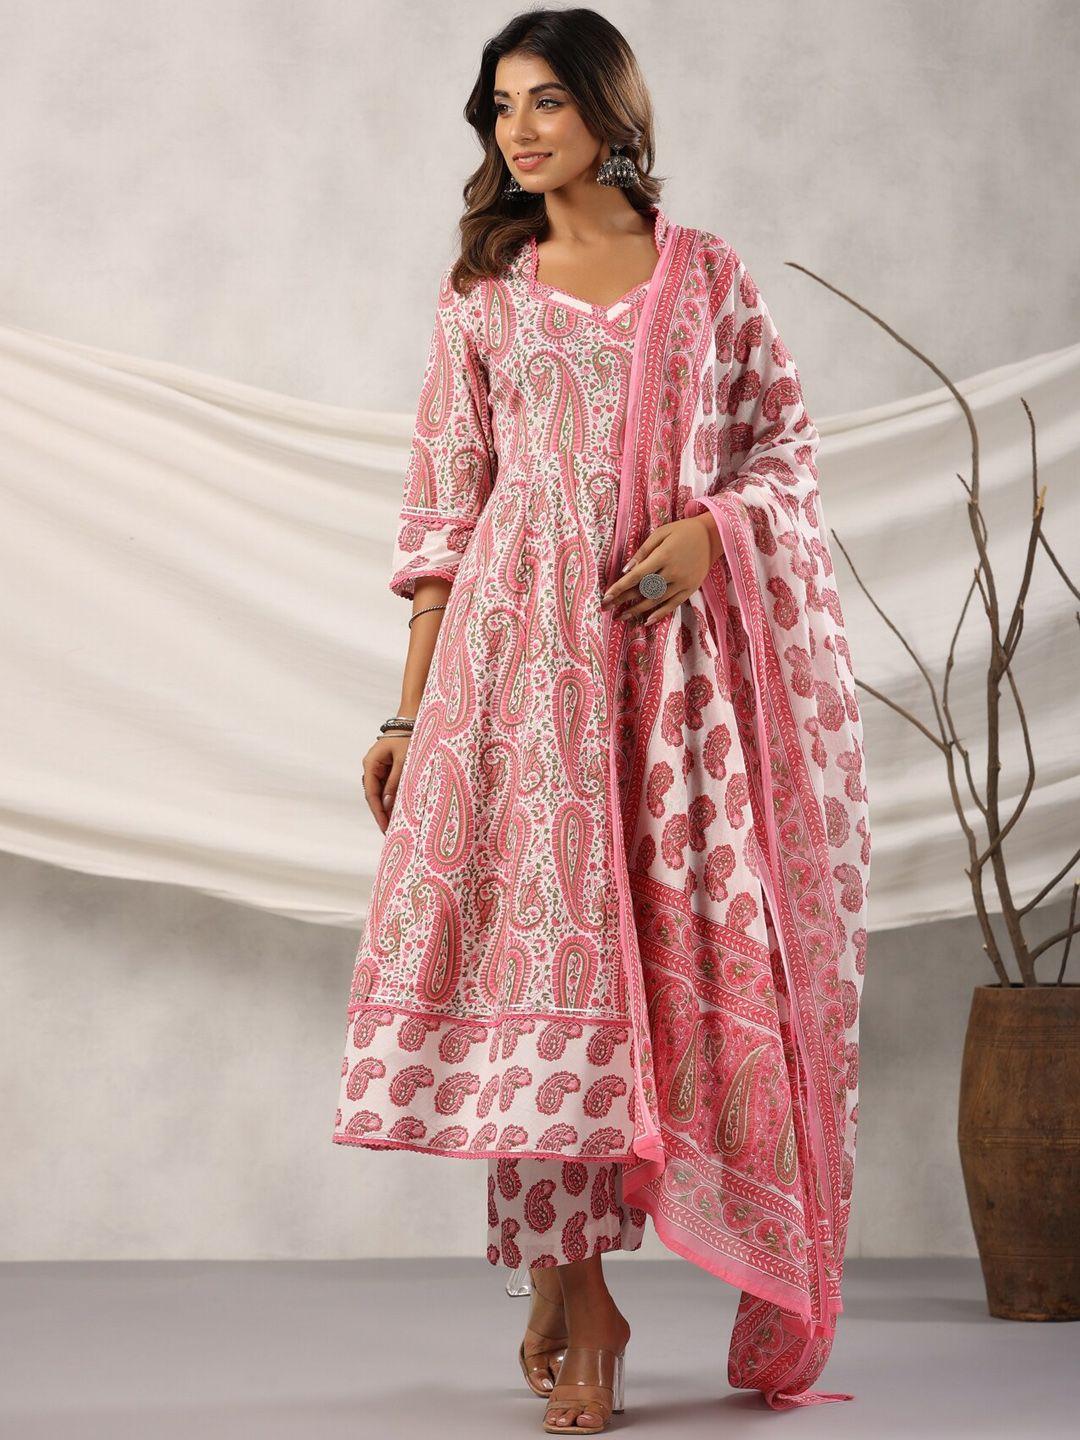 etnicawear floral printed pure cotton anarkali kurta with trousers & dupatta